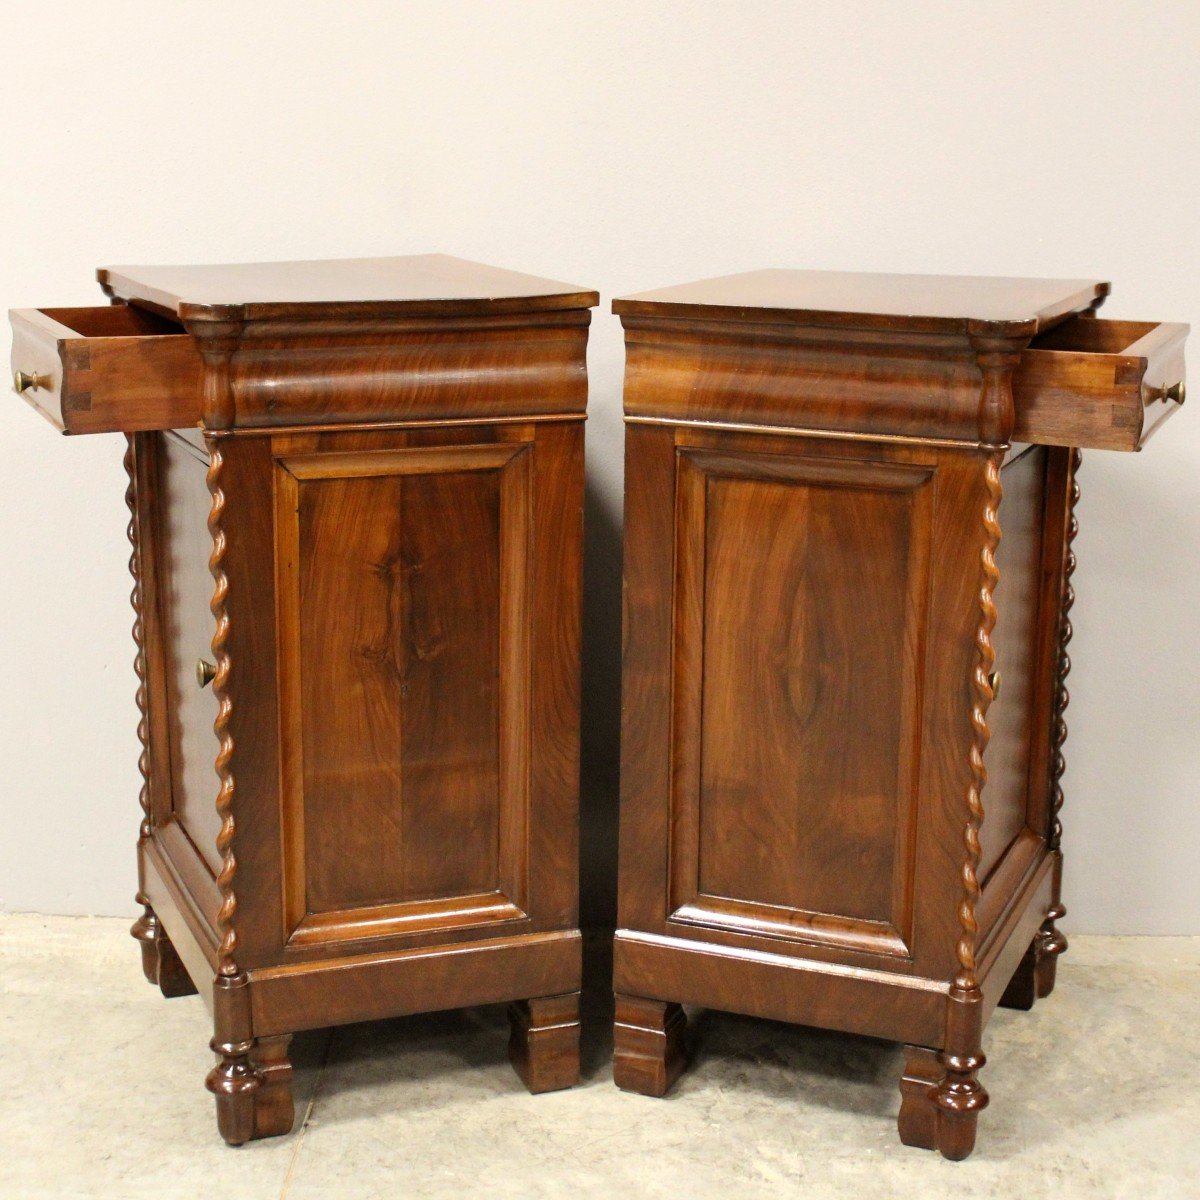 Antique Pair Of Louis Philippe Bedsides Nightstands Tables In Walnut - Italy 19th-photo-1